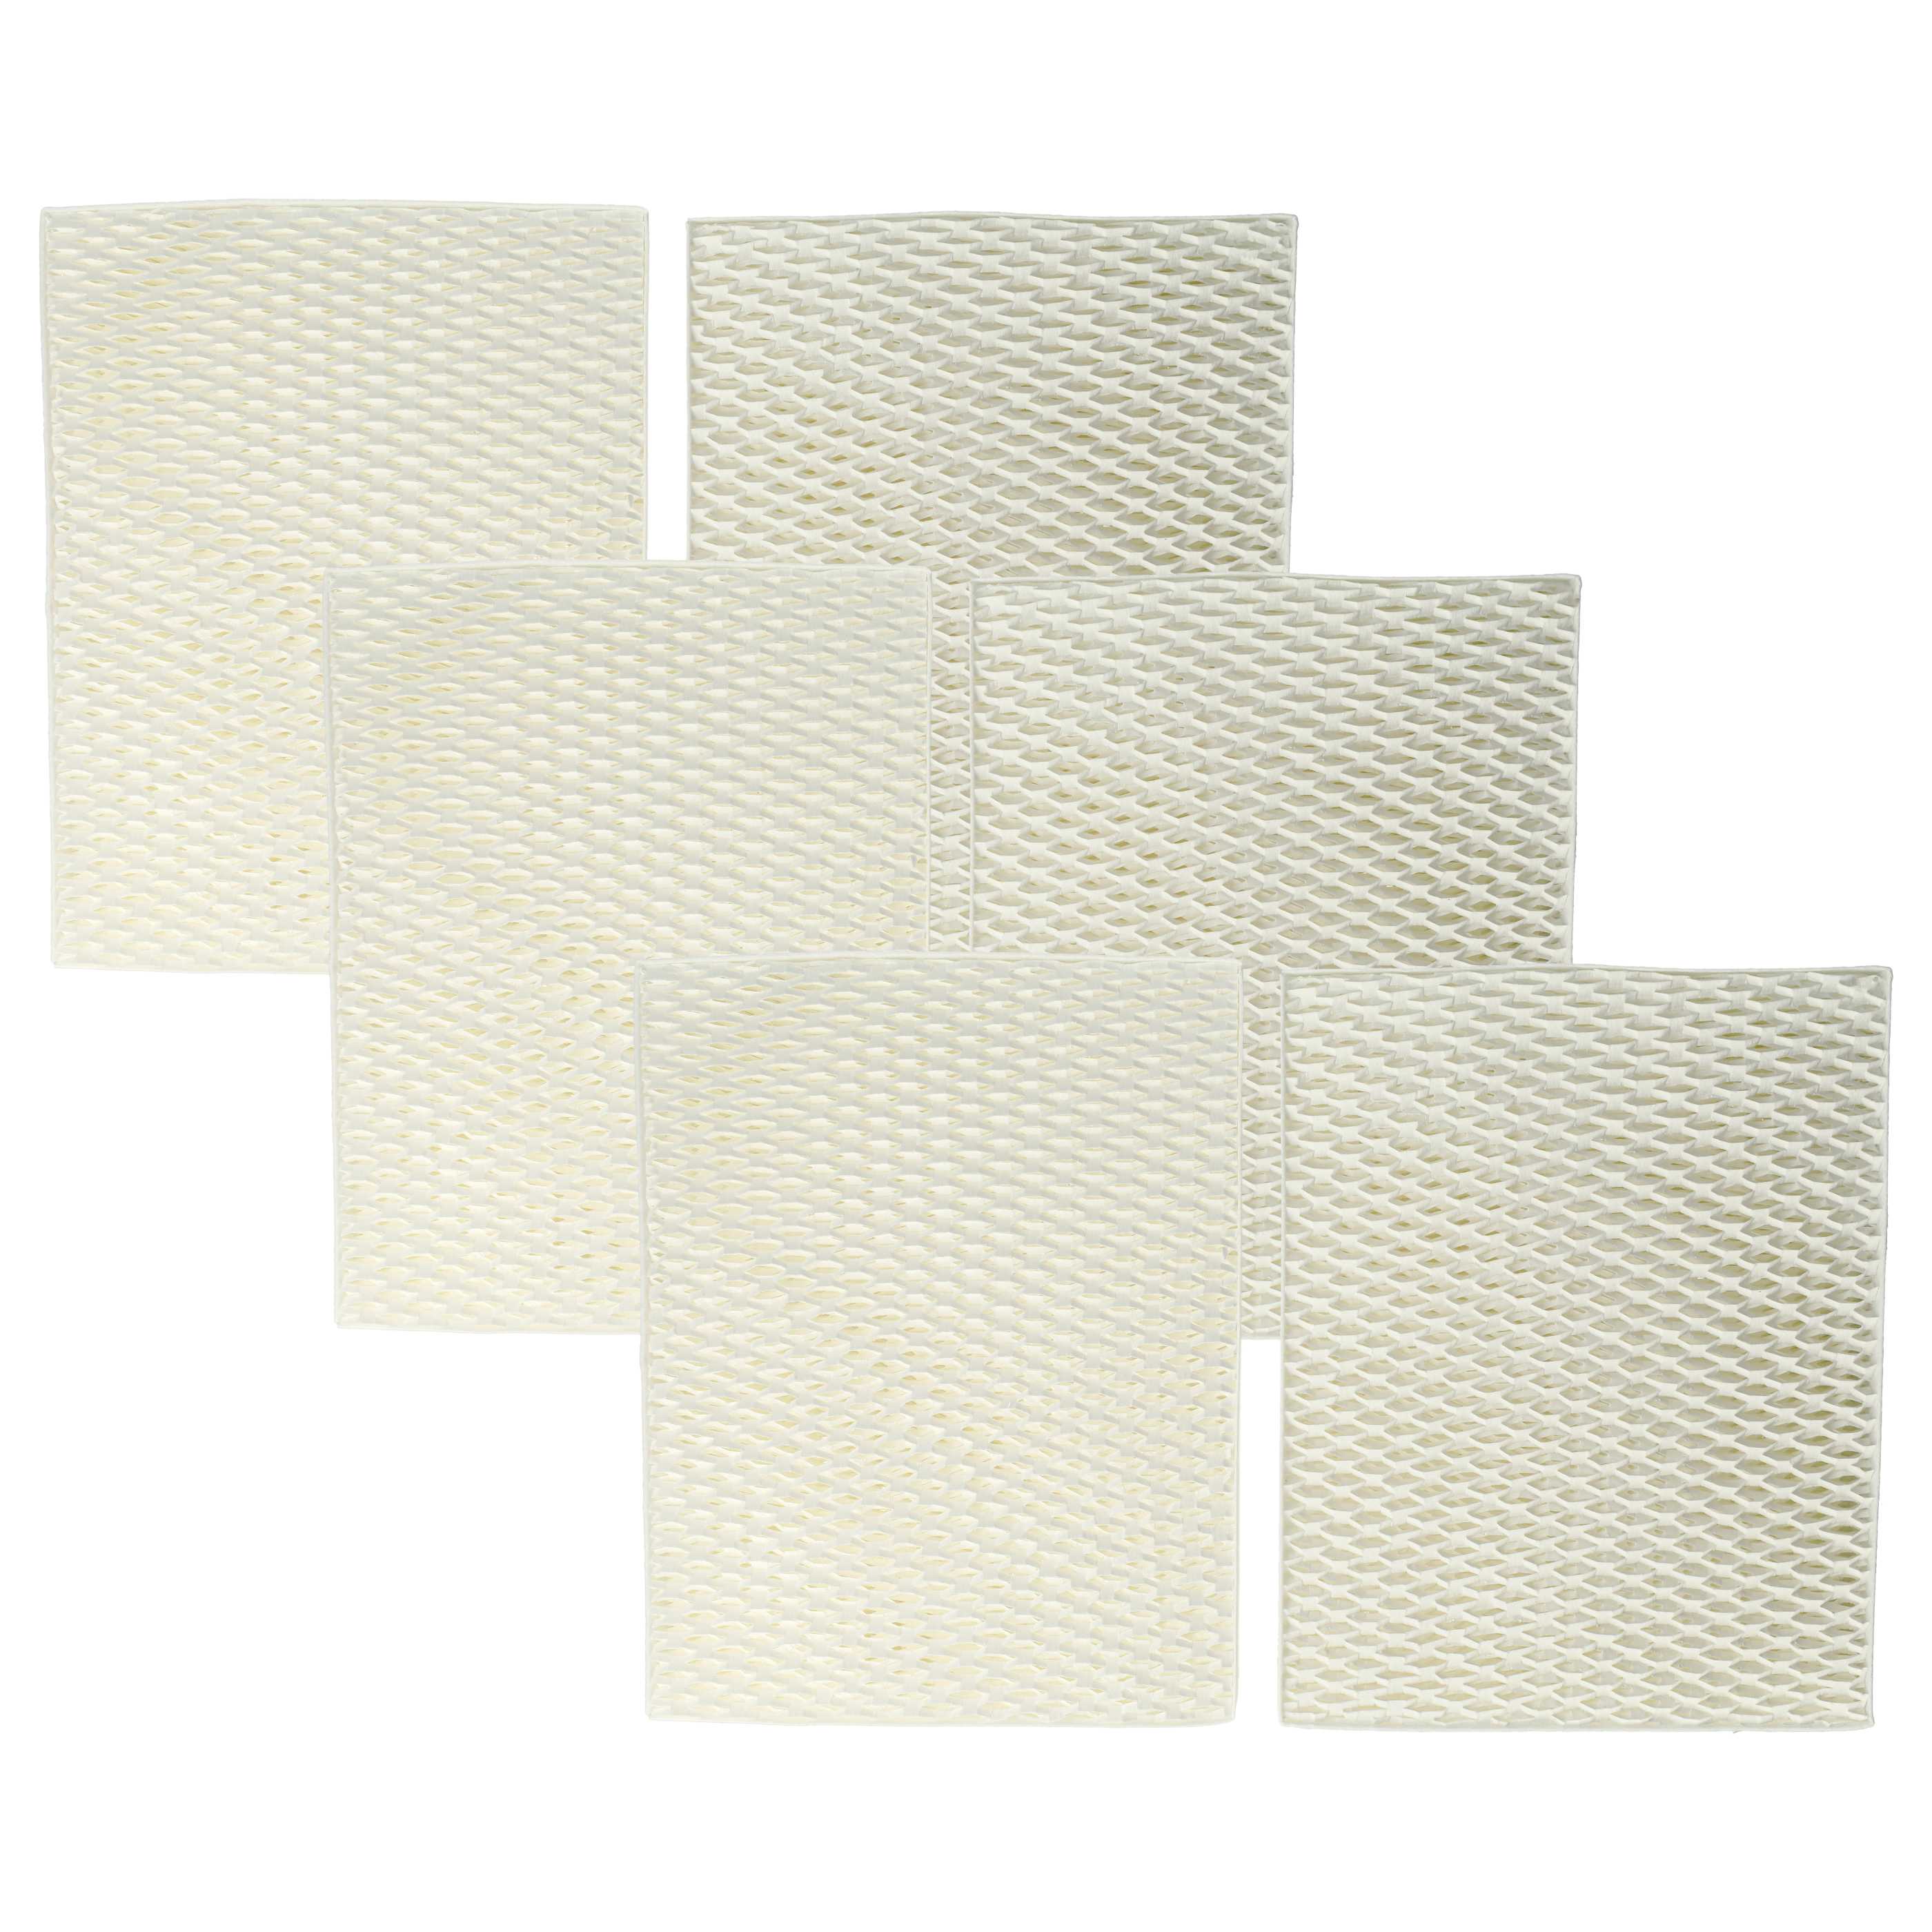 6x Filter replaces Stadler Form 10004, 14643/10 for Humidifier - paper